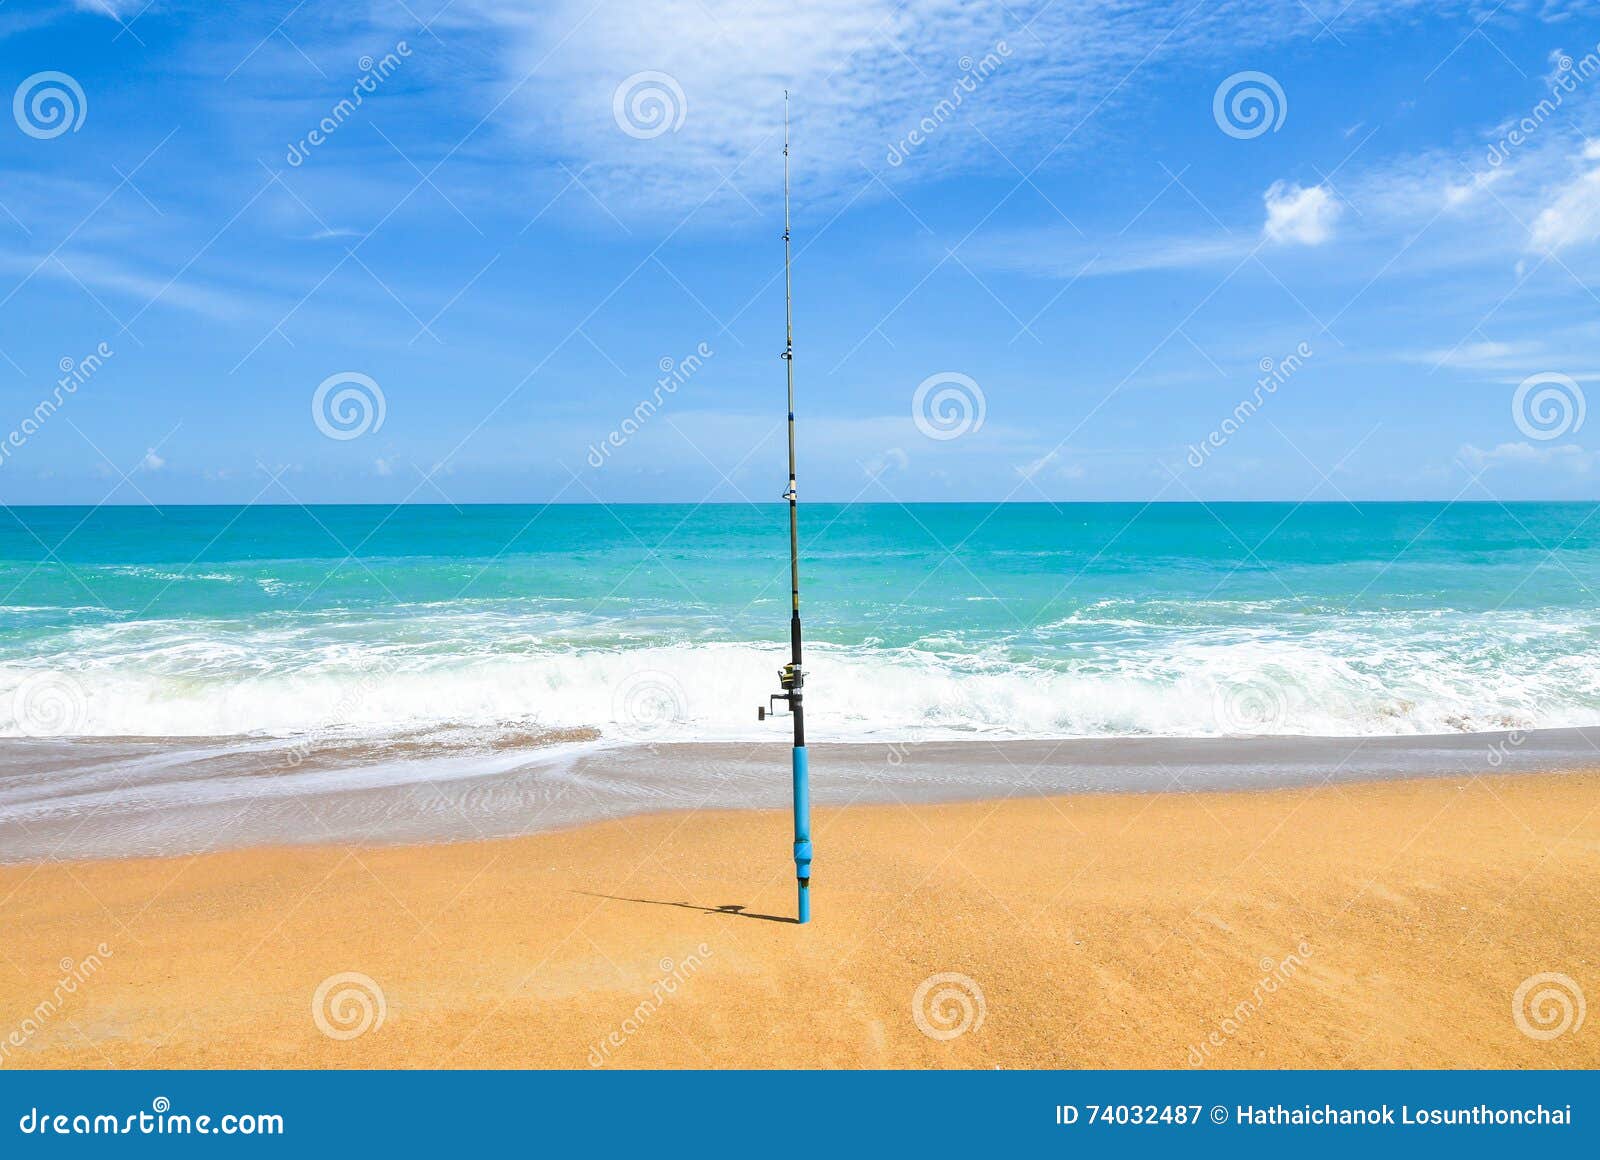 Fishing Rod on Empty Beach with Beautiful Ocean. Rod Spinning with